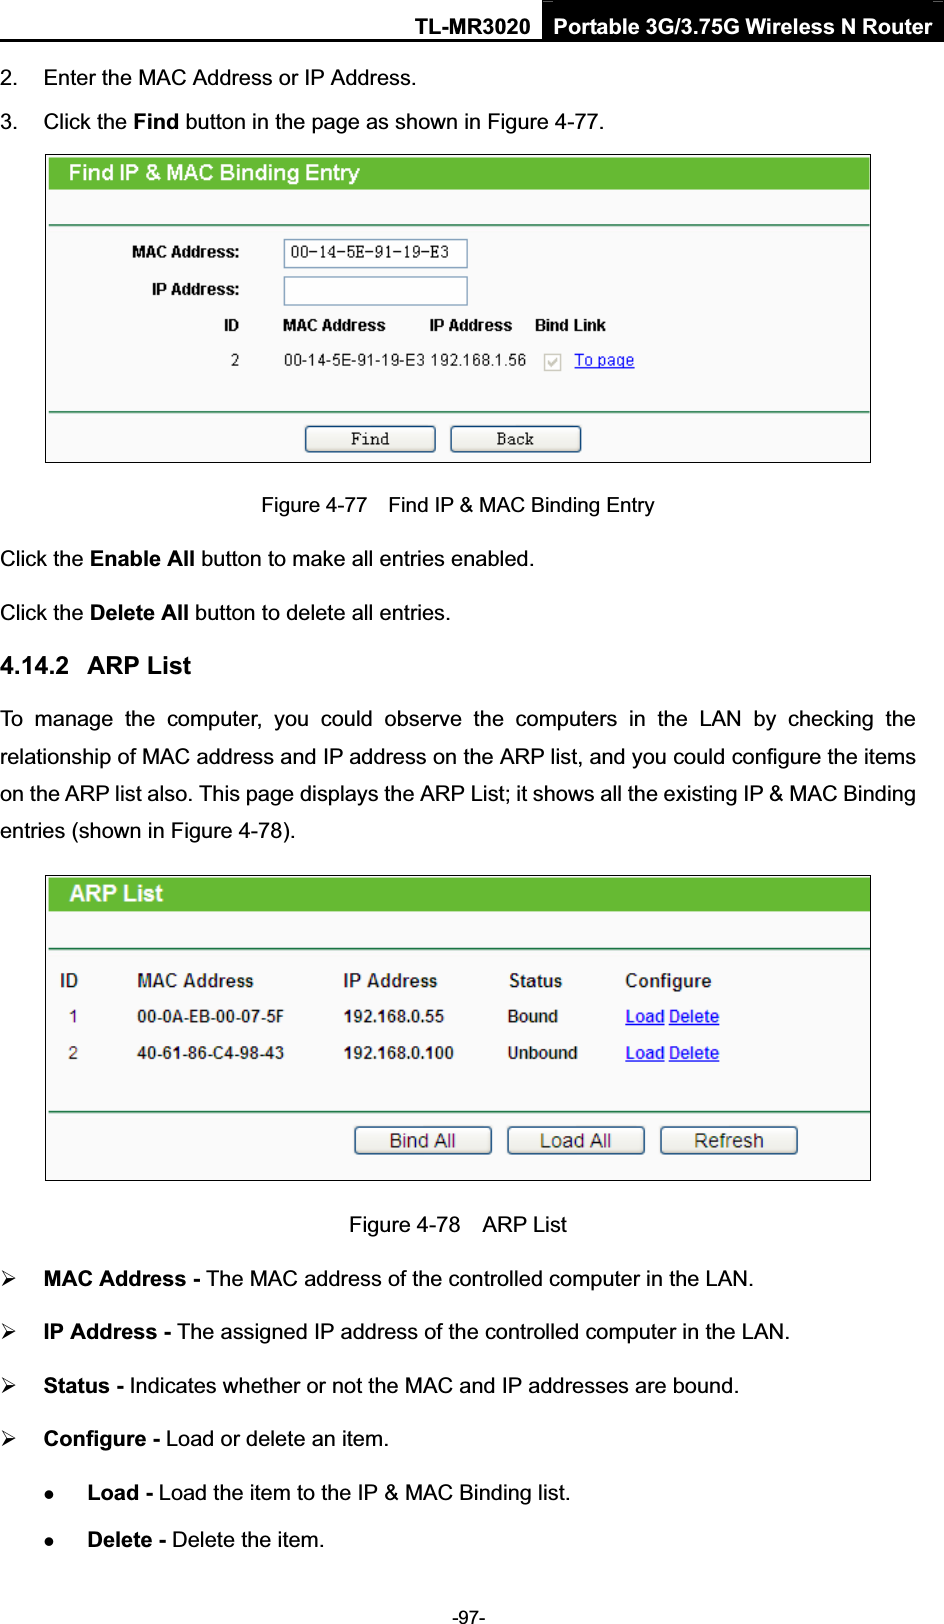 TL-MR3020 Portable 3G/3.75G Wireless N Router-97-2.  Enter the MAC Address or IP Address. 3.  Click the Find button in the page as shown in Figure 4-77. Figure 4-77    Find IP &amp; MAC Binding Entry Click the Enable All button to make all entries enabled. Click the Delete All button to delete all entries. 4.14.2 ARP List To  manage  the  computer,  you  could  observe  the  computers  in  the  LAN  by  checking  the relationship of MAC address and IP address on the ARP list, and you could configure the items on the ARP list also. This page displays the ARP List; it shows all the existing IP &amp; MAC Binding entries (shown in Figure 4-78).     Figure 4-78    ARP List ¾MAC Address - The MAC address of the controlled computer in the LAN.   ¾IP Address - The assigned IP address of the controlled computer in the LAN.   ¾Status - Indicates whether or not the MAC and IP addresses are bound. ¾Configure - Load or delete an item.   zLoad - Load the item to the IP &amp; MAC Binding list.   zDelete - Delete the item.   